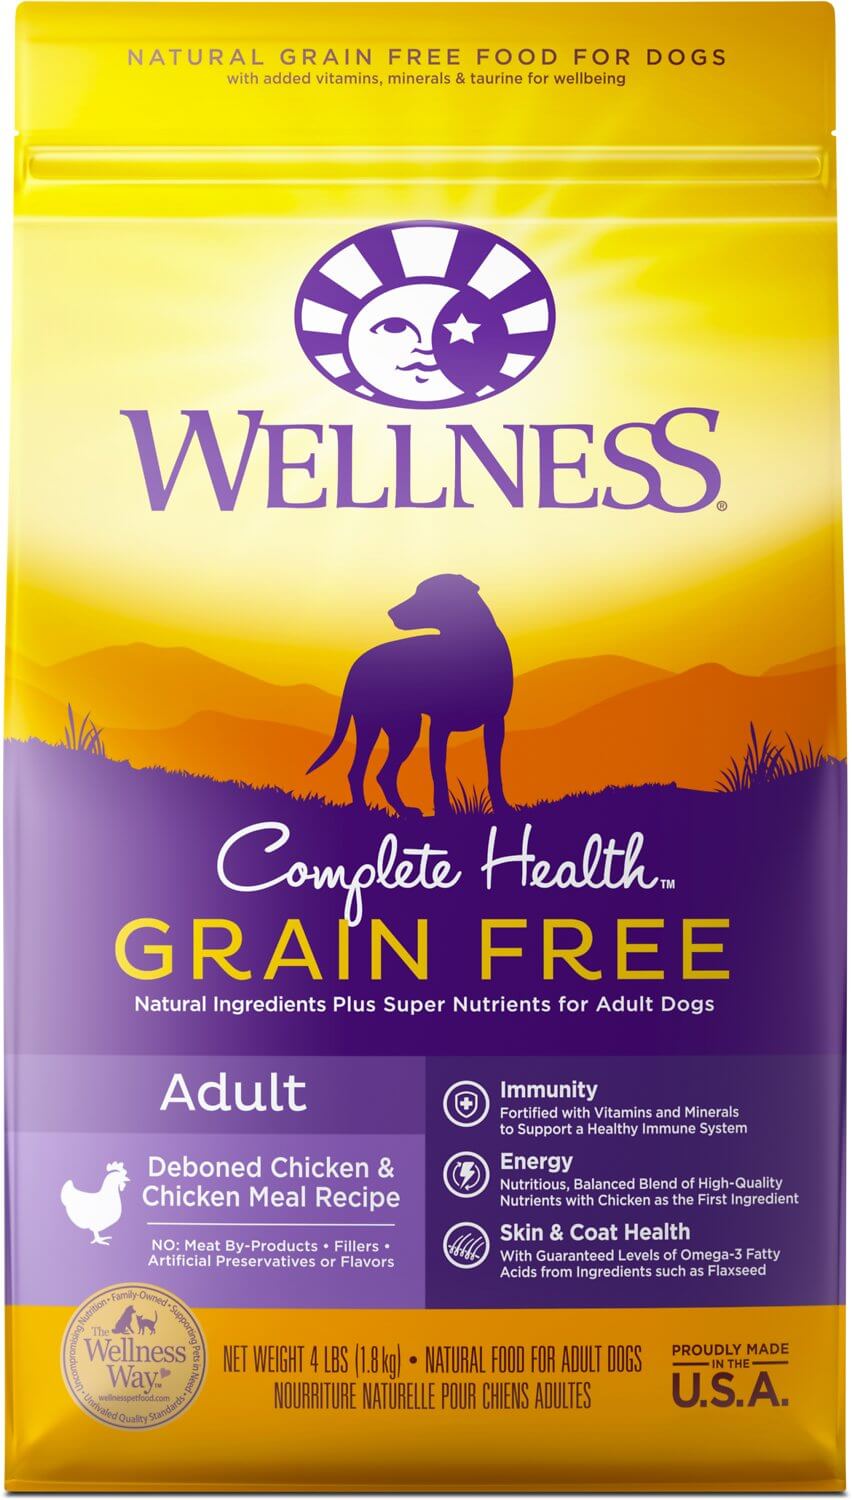 Wellness Complete Health Grain Free Dog Food Review (Dry)